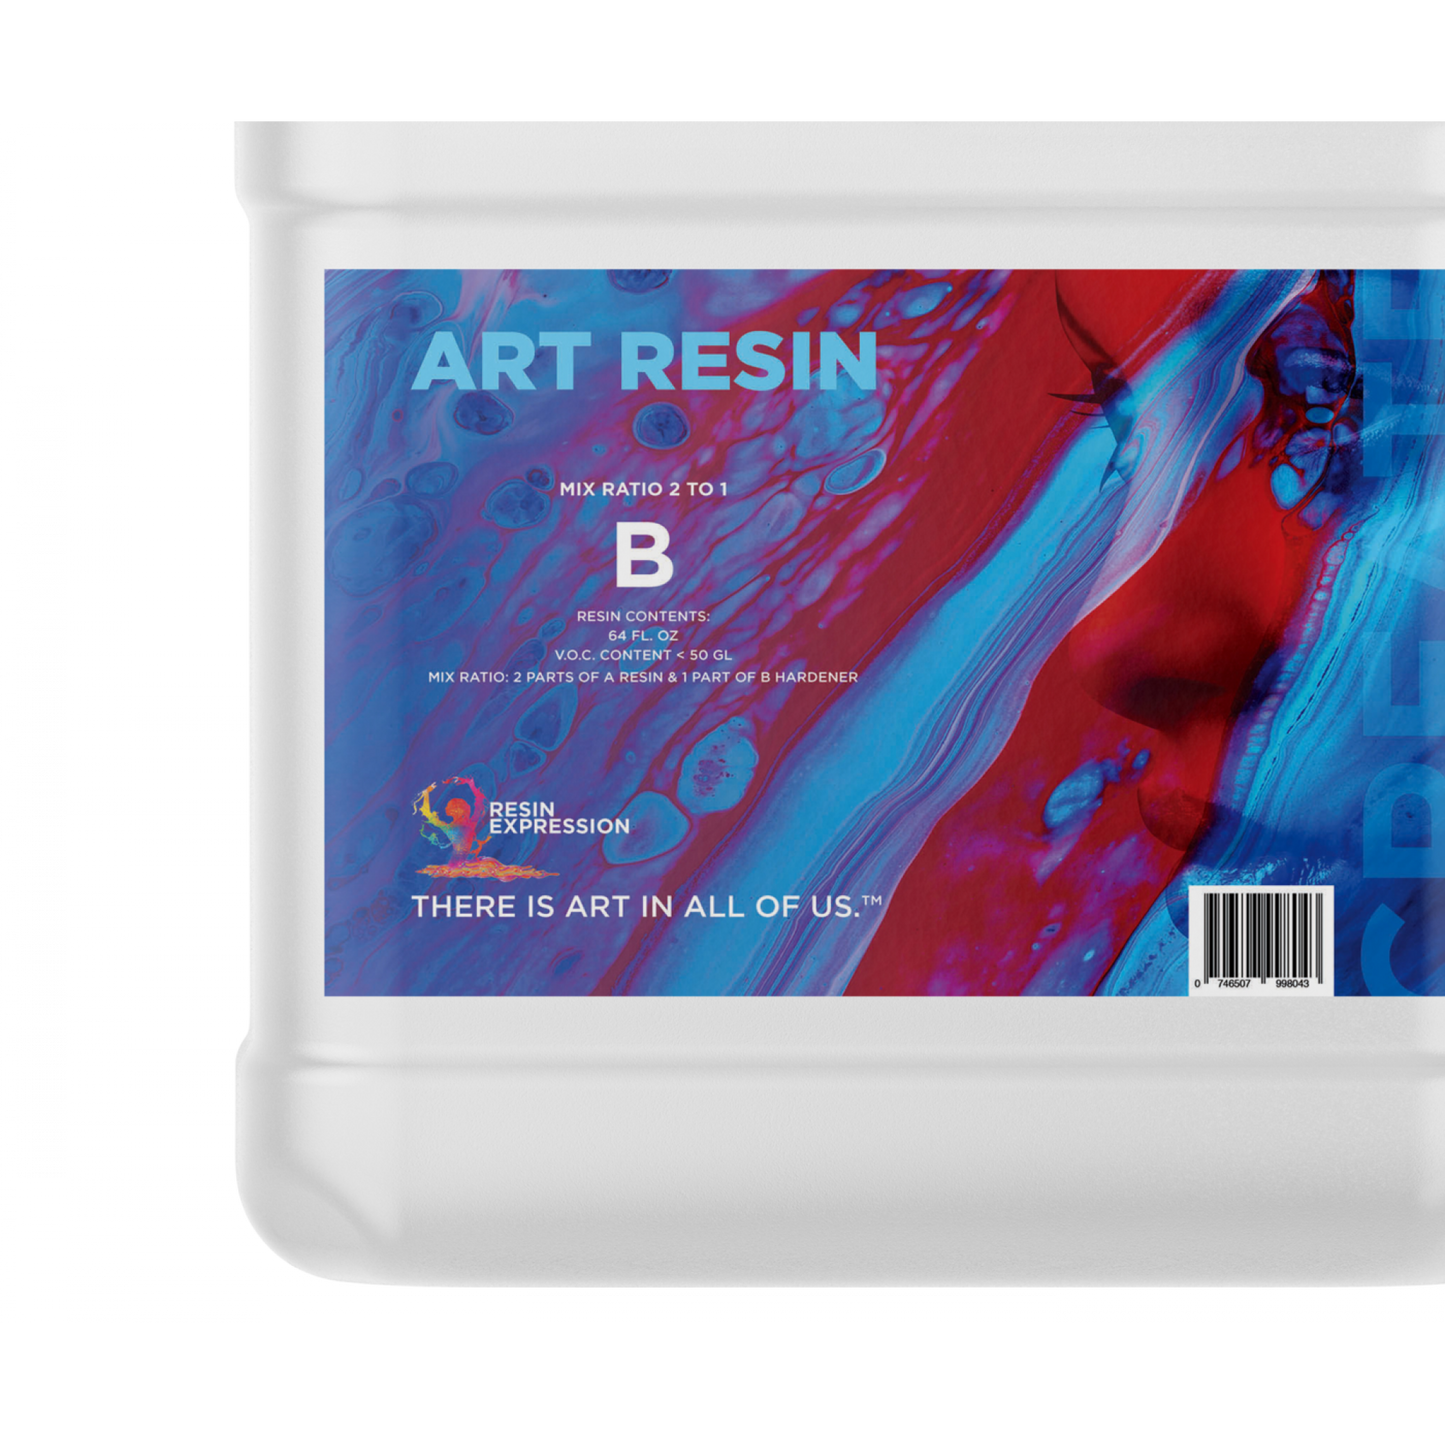 Durable and Versatile - ART RESIN 1.5 Gal Kit for Professional-Quality Art Projects